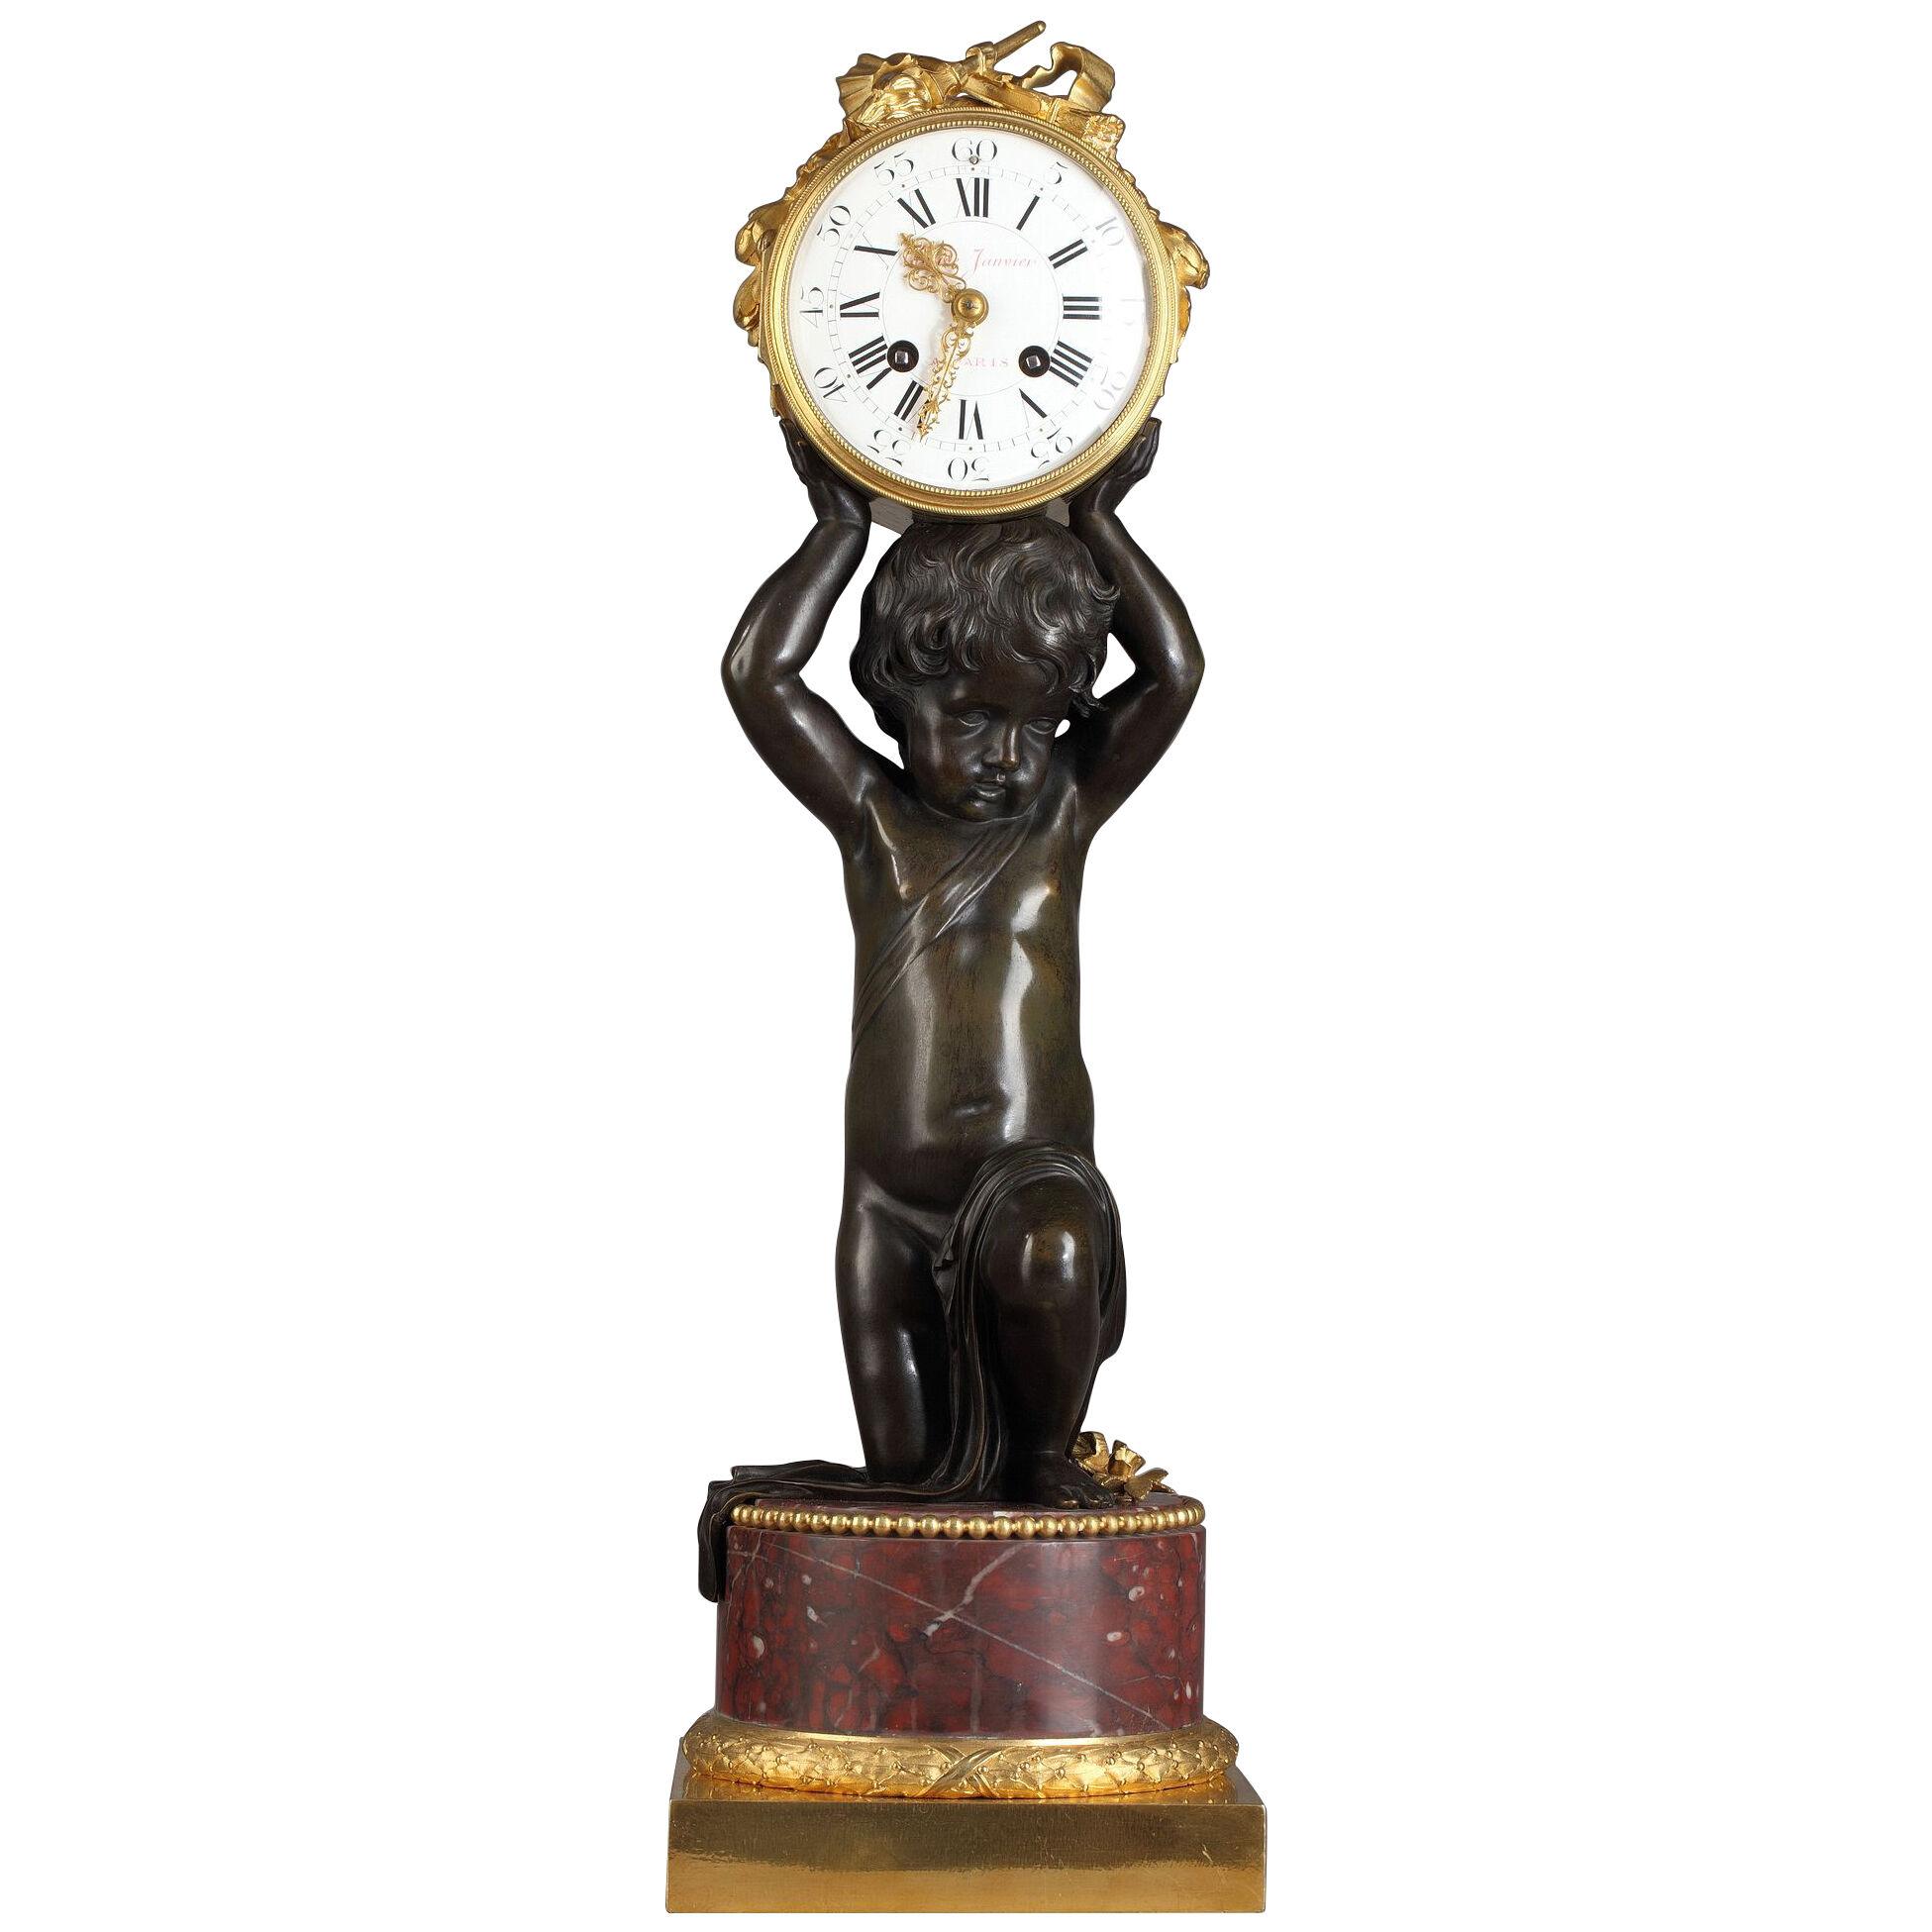 Patinated and Gilded Bronze Clock by E. Hazart, France, Circa 1880